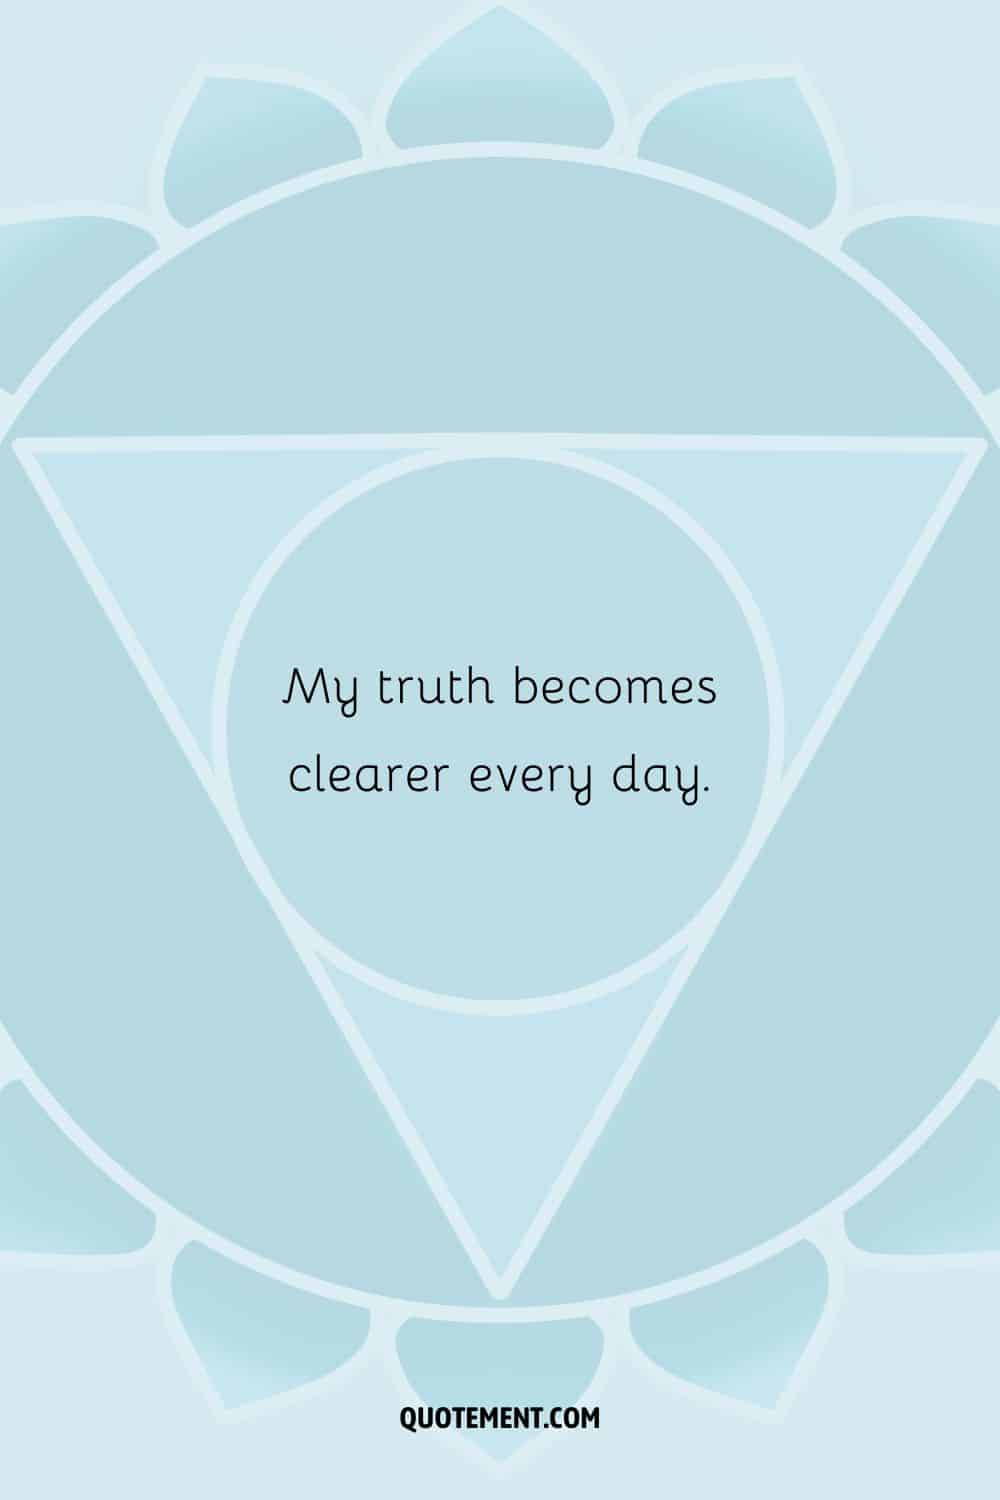 “My truth becomes clearer every day.”